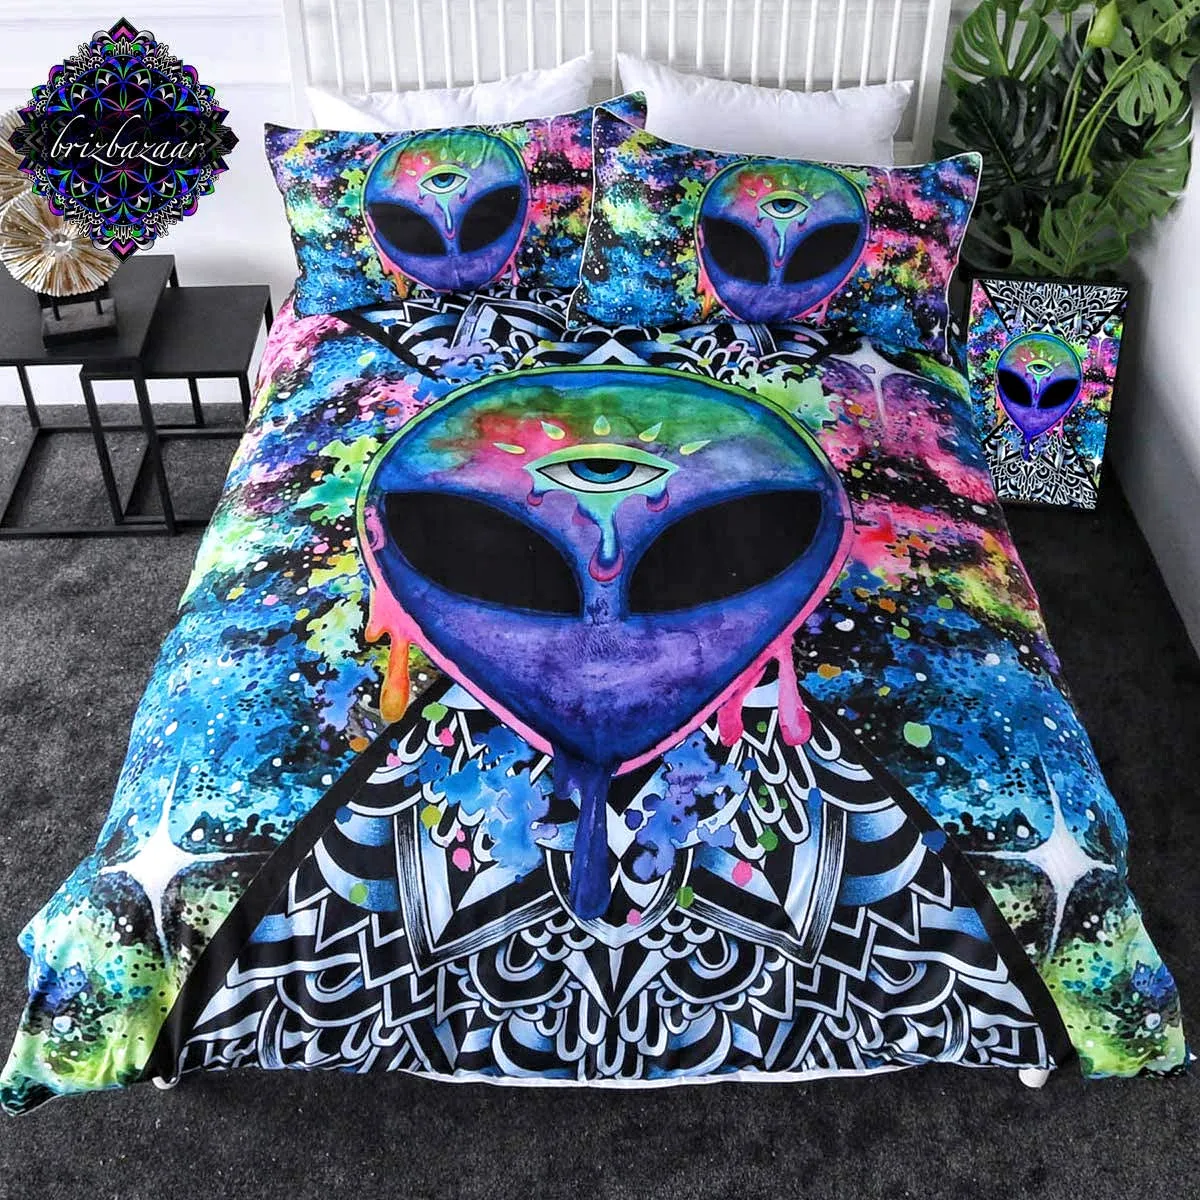 

Trippy Alien Skull Bedding Set Psychedelic Duvet Cover Colorful Abstract Comforter Cover Soft Bedspreads for Adults Men Boys